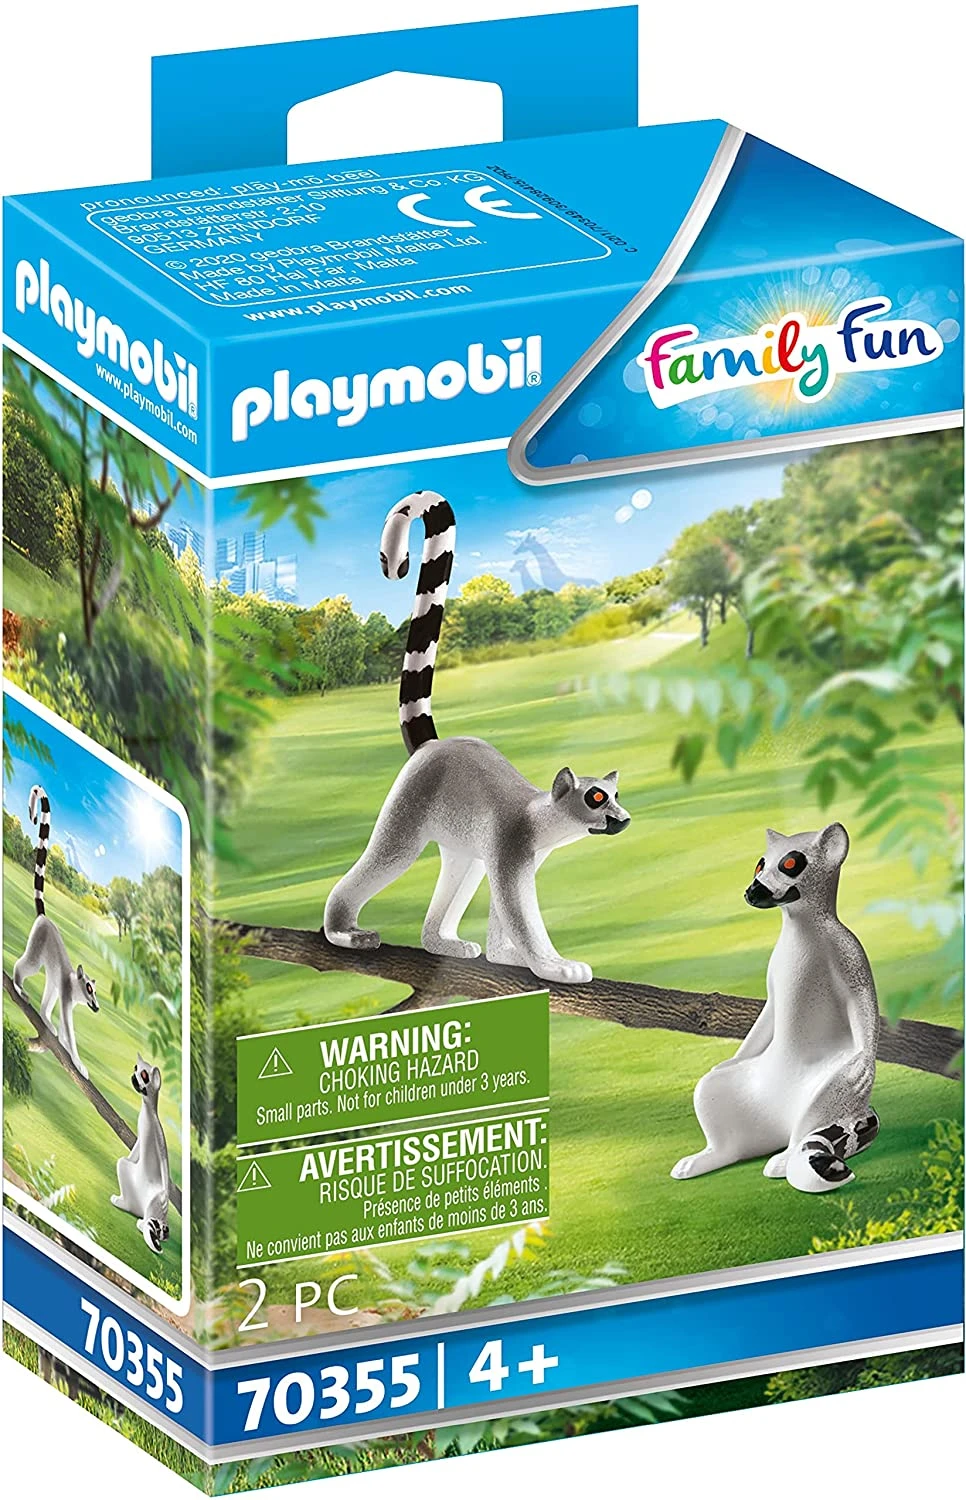 Playmobil Lemurs, 70355, Zoo, Animals, Original, Toys, Kids, Girls, Gifts,  Collector, Figures, Dolls, Shop, With Box, New, Man, Woman - Action Figures  - AliExpress